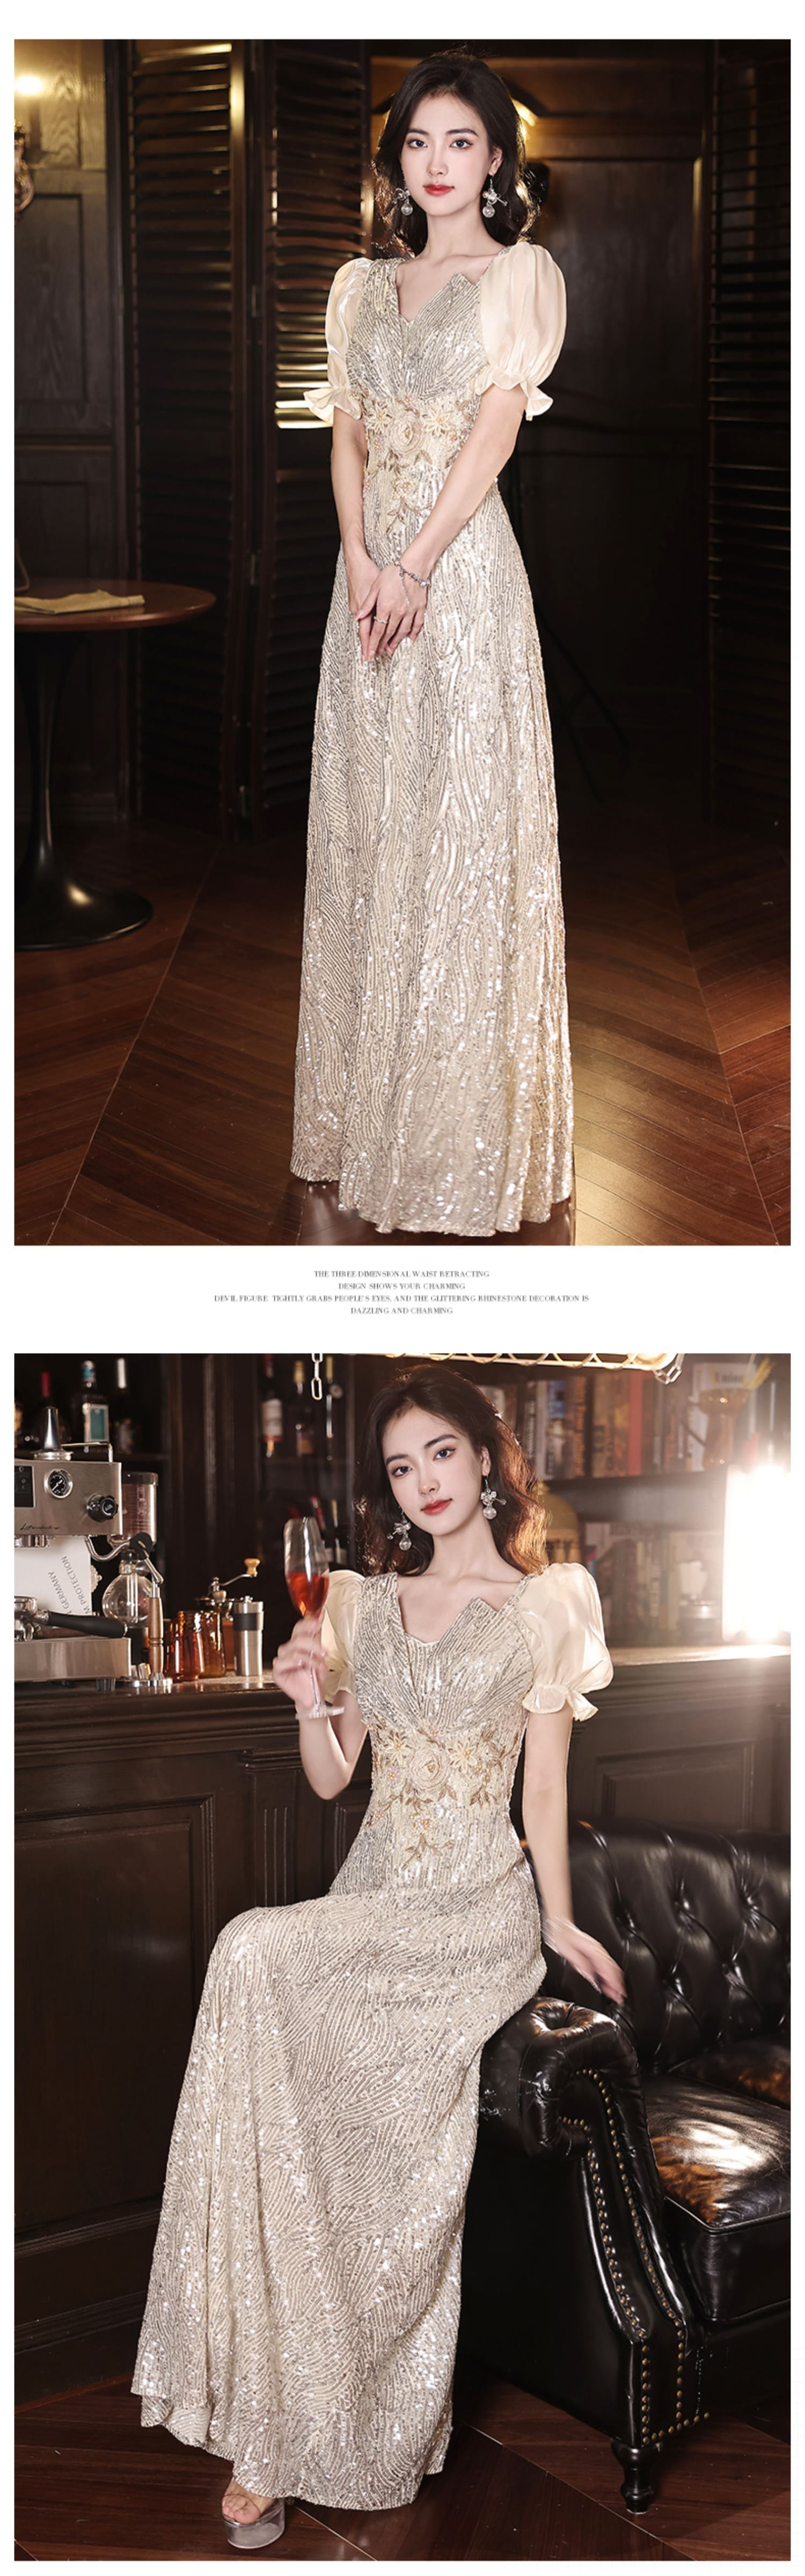 Luxury-Sparkly-Short-Puff-Sleeves-Sequin-Evening-Party-Formal-Dress14